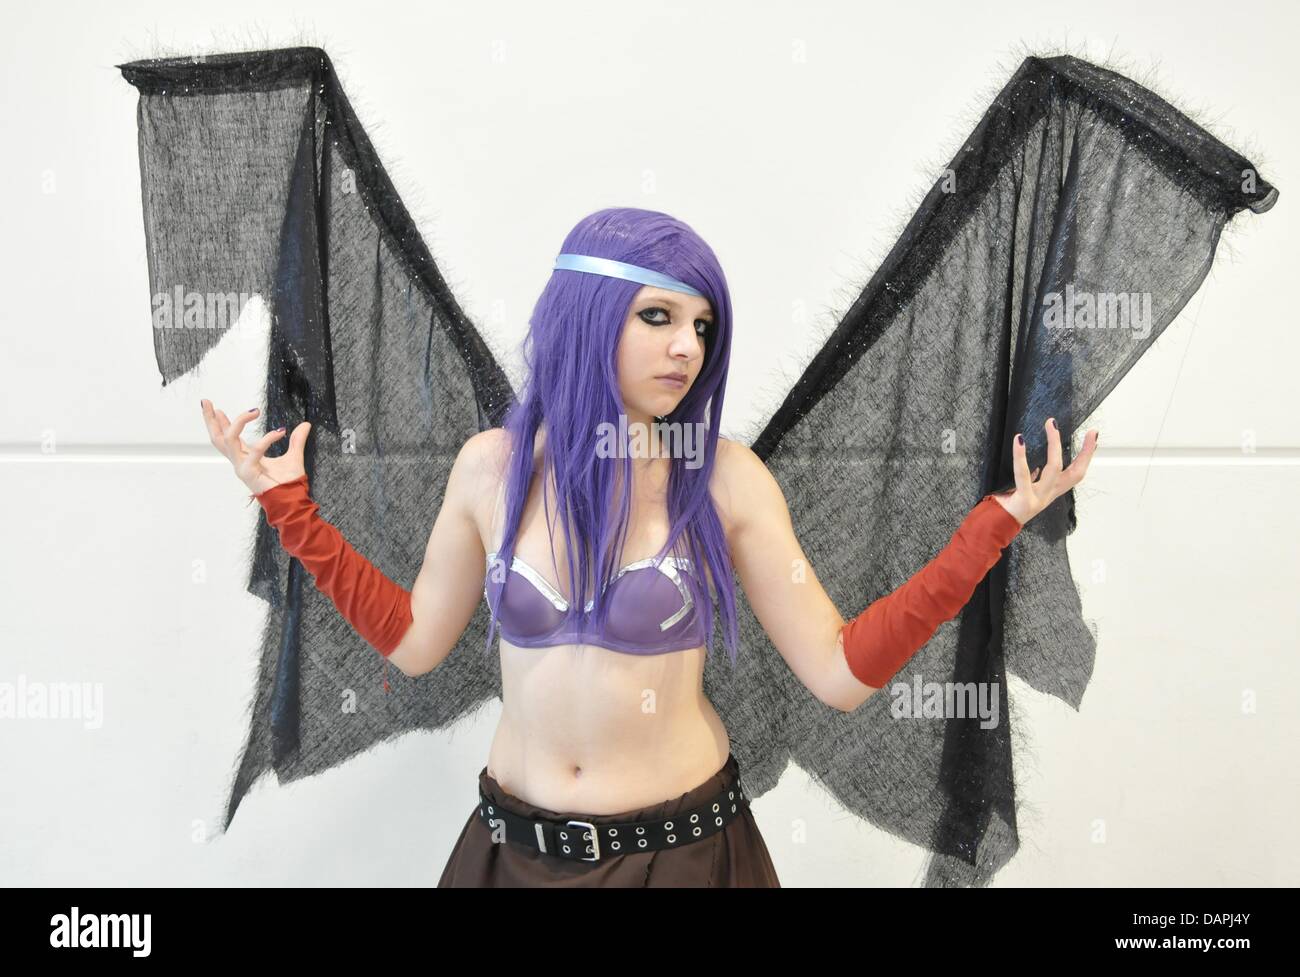 A computer game fan dressed as Morgana from the computer game 'League of Legends' poses at the computer convention Gamescom in the Nintendo game area in Cologne, Germany, 21 August 2011. Gamescom in Cologne, Europe's largest game convention with 550 exhibitors showing the new trends in online games and 3D animation, had a storm of visitors on its closing weekend (20/21 August 2011) Stock Photo